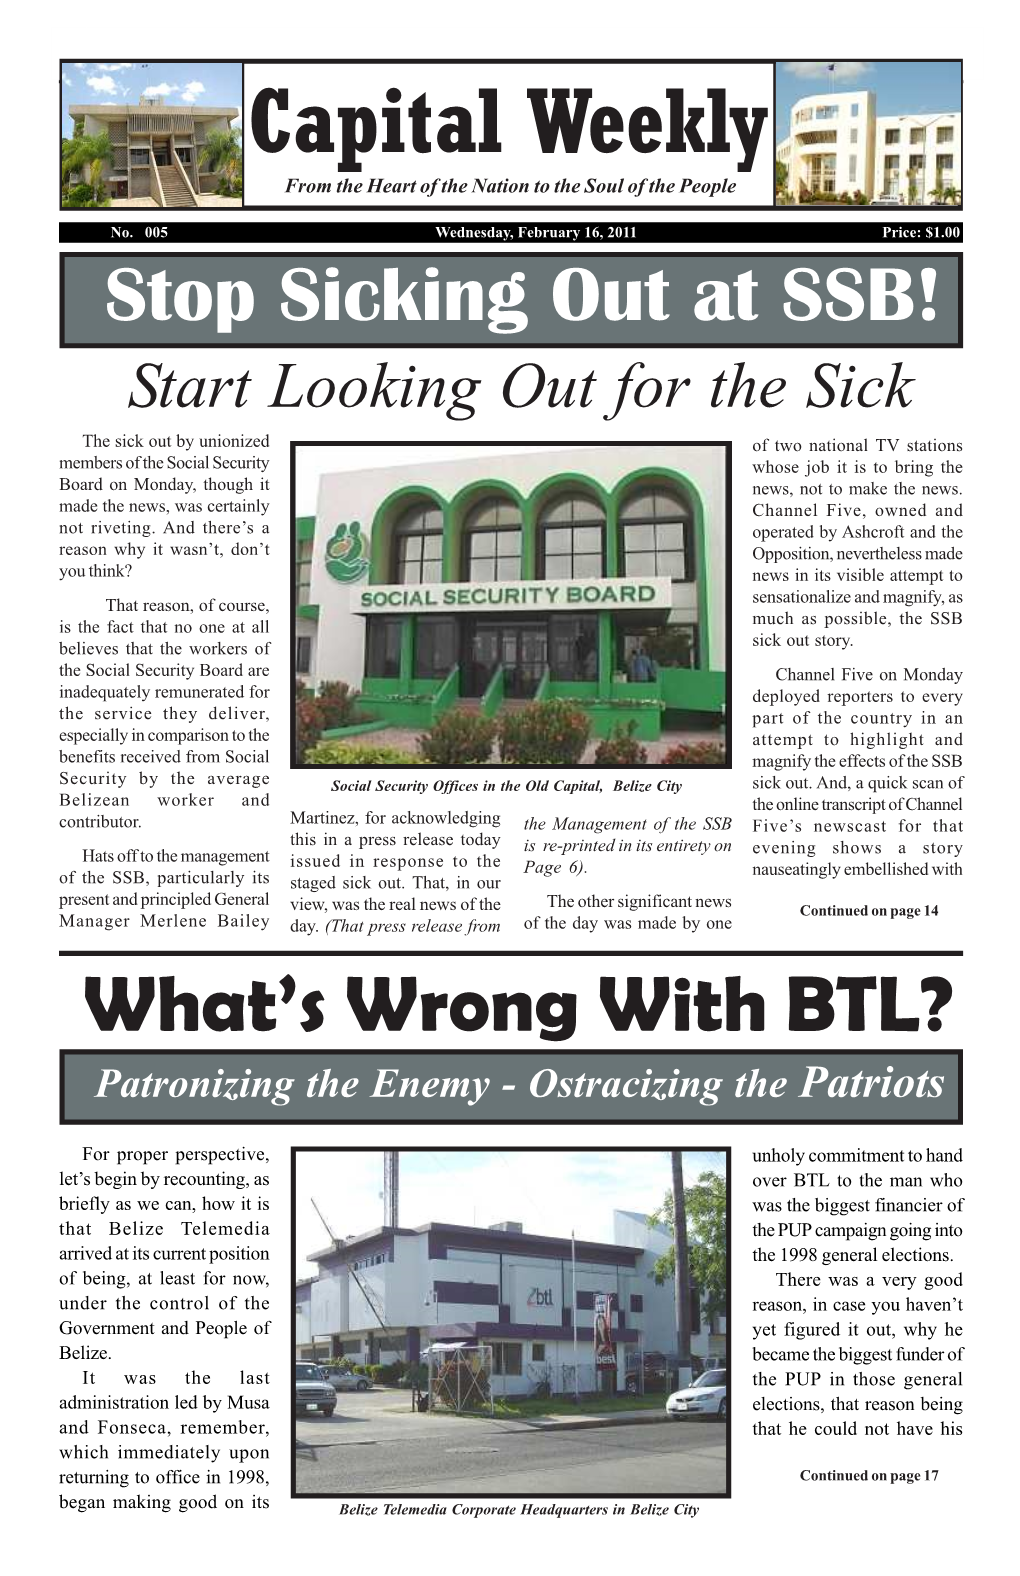 What's Wrong with BTL?